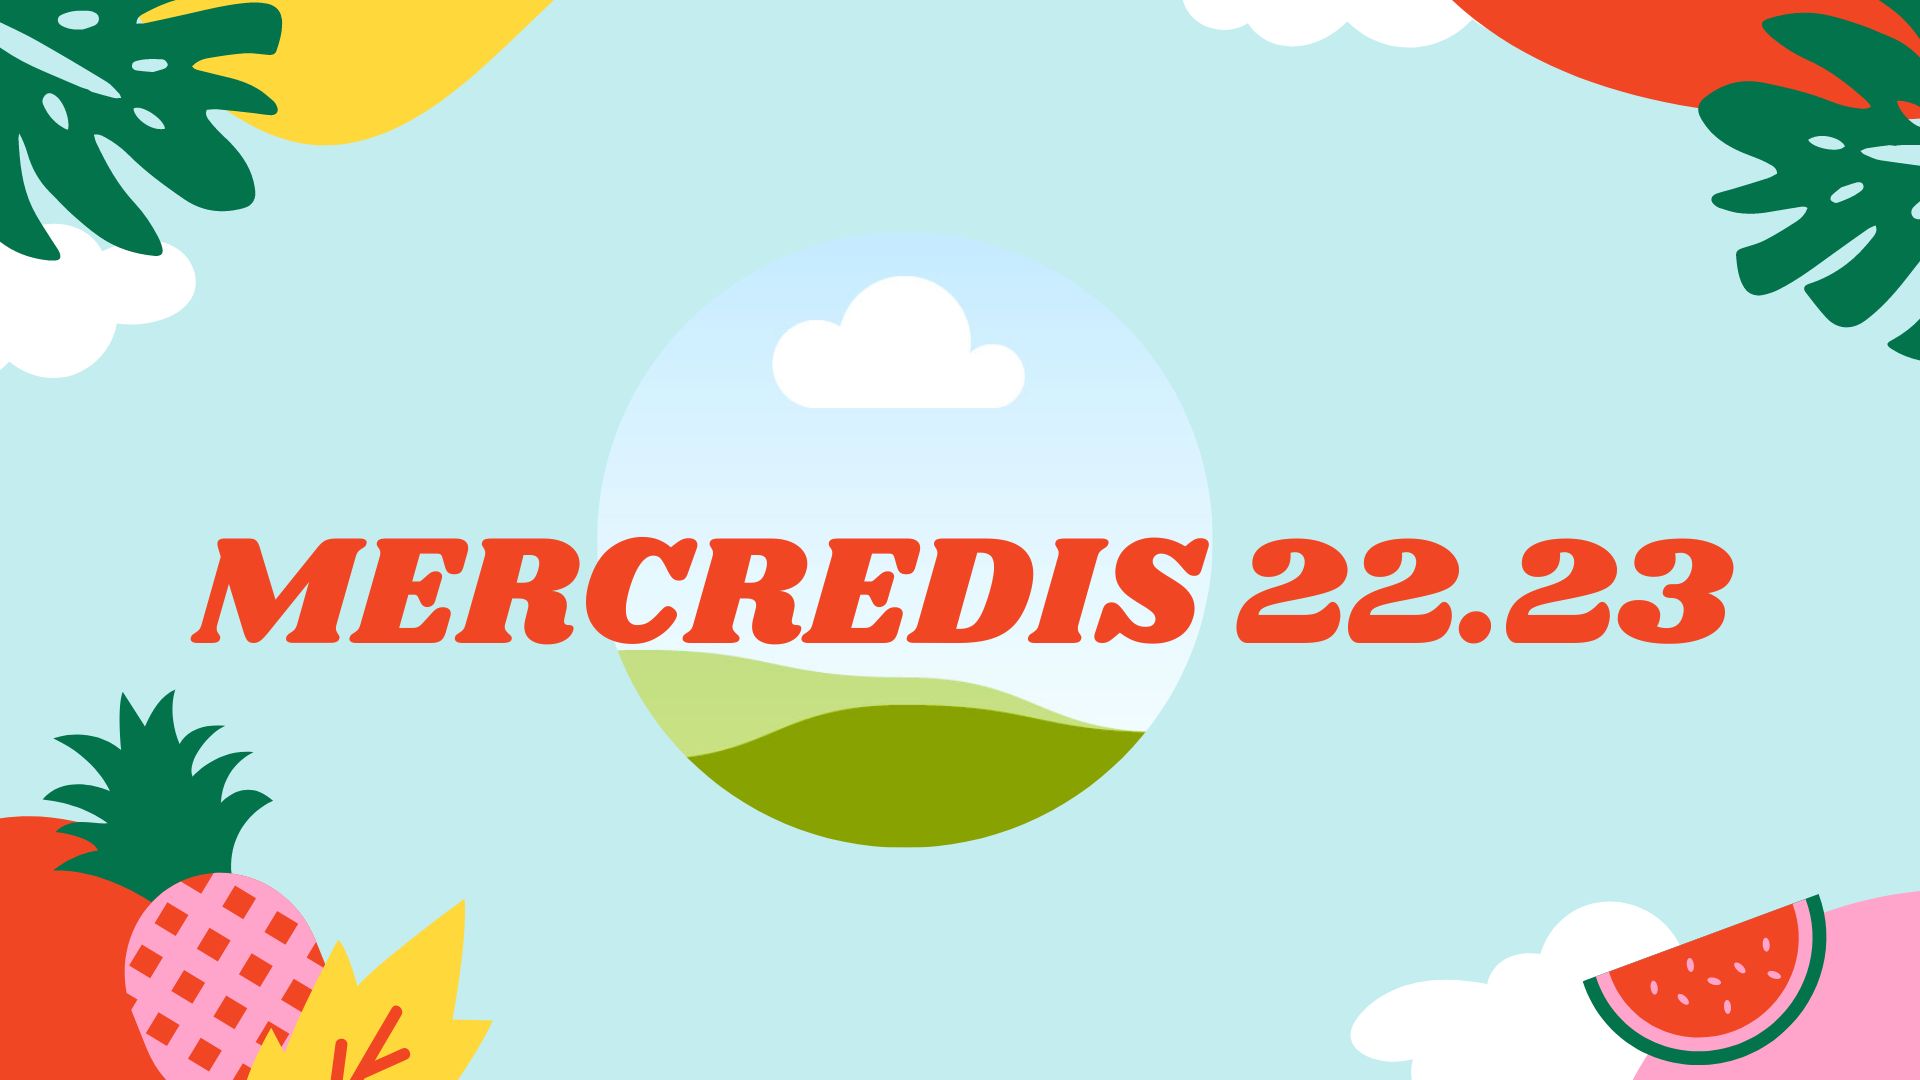 You are currently viewing MERCREDIS 2022.2023